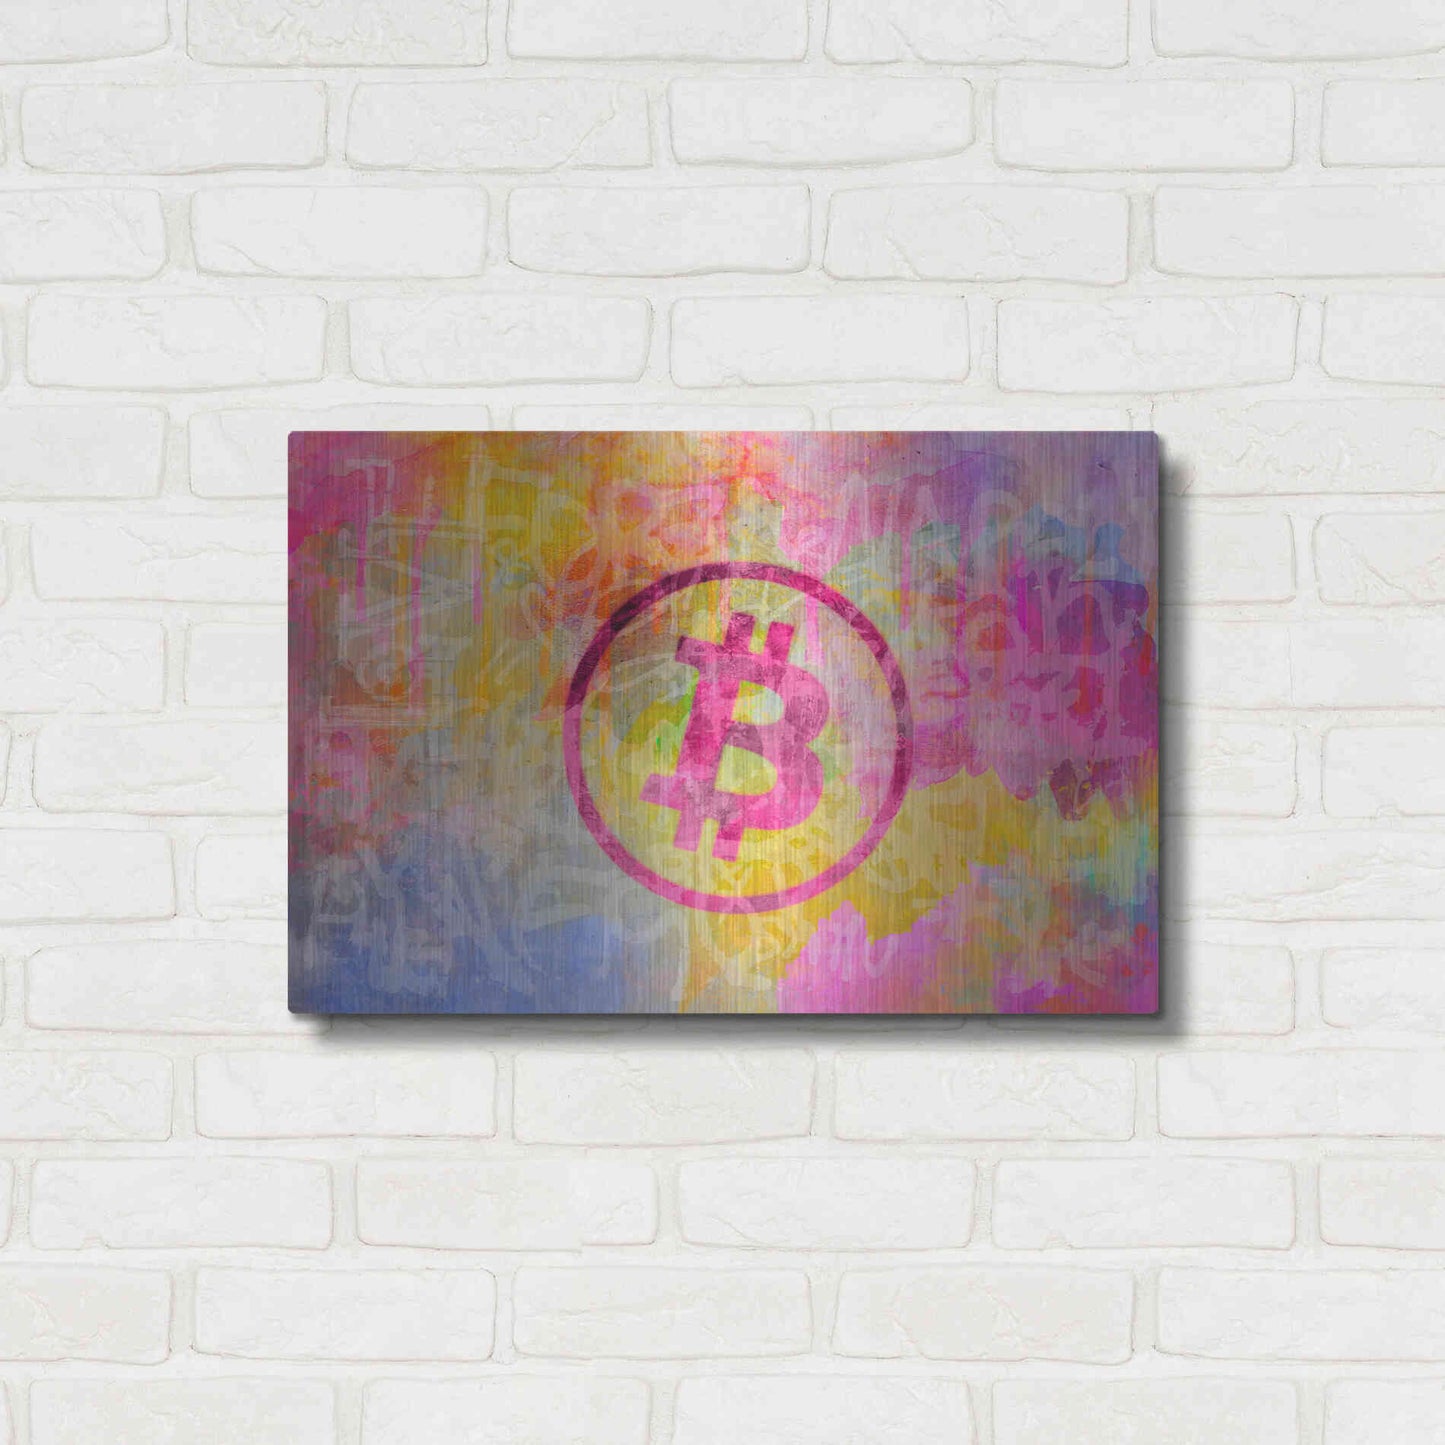 Luxe Metal Art 'Street Art Bitcoin' by Andrea Haase, Metal Wall At,24x16